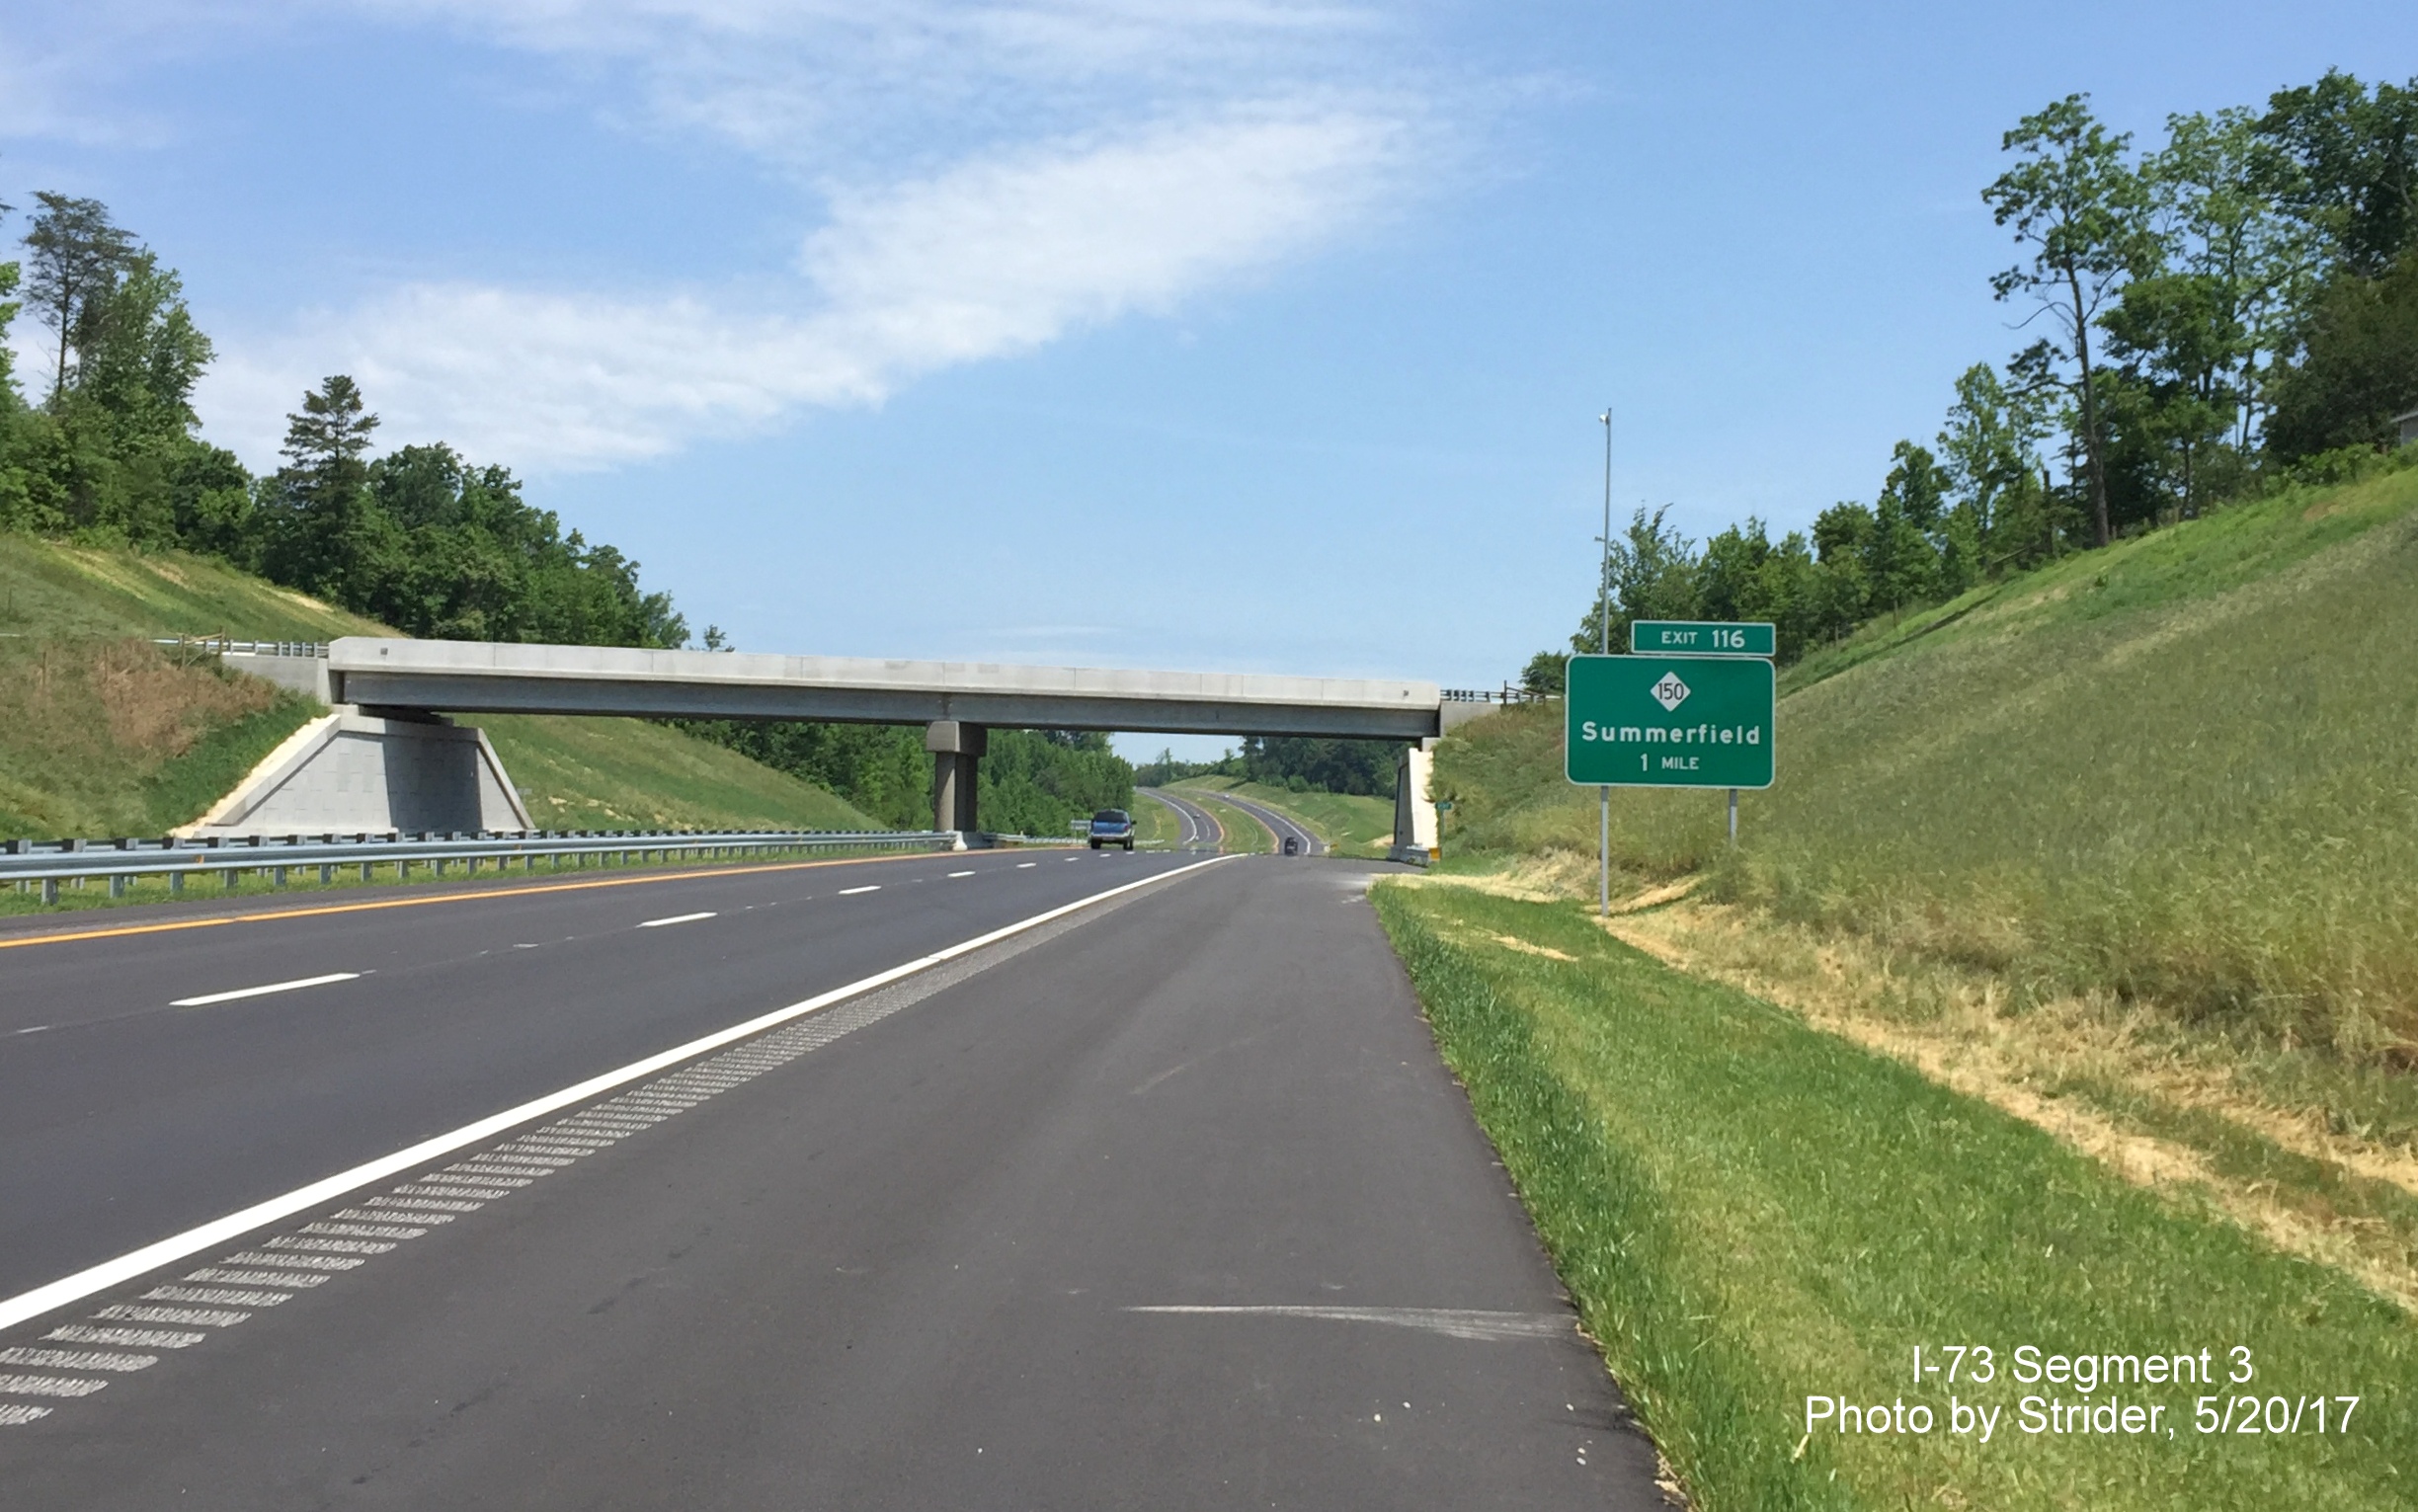 Image taken of 1 Mile Advance sign for NC 150 exit on I-73 North in Summerfield, by Strider